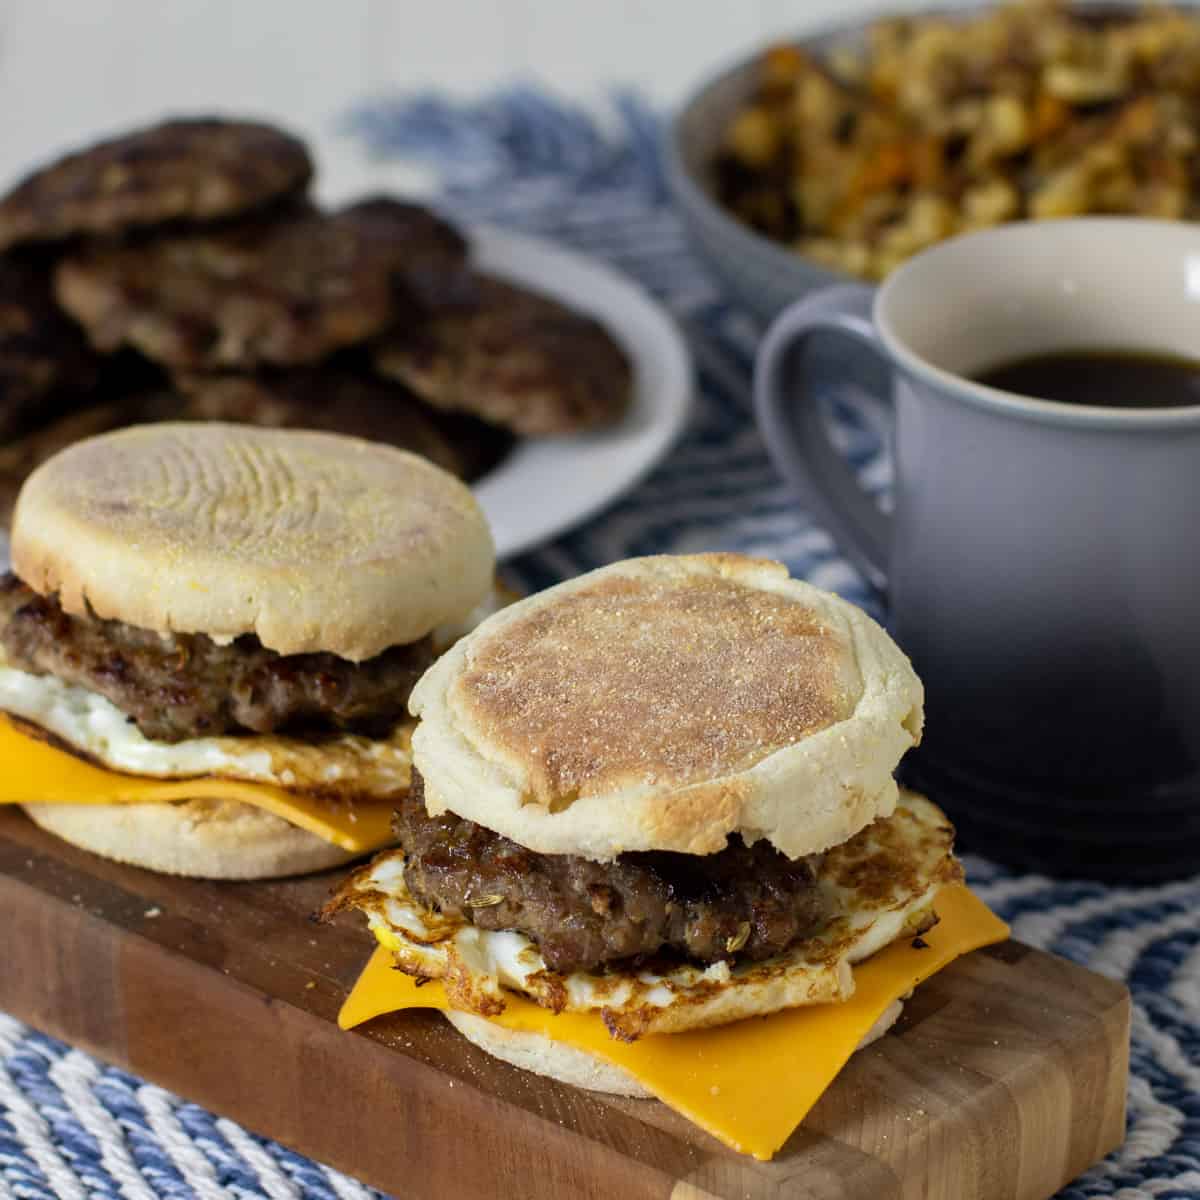 Breakfast sandwiches next to a mug of coffee.